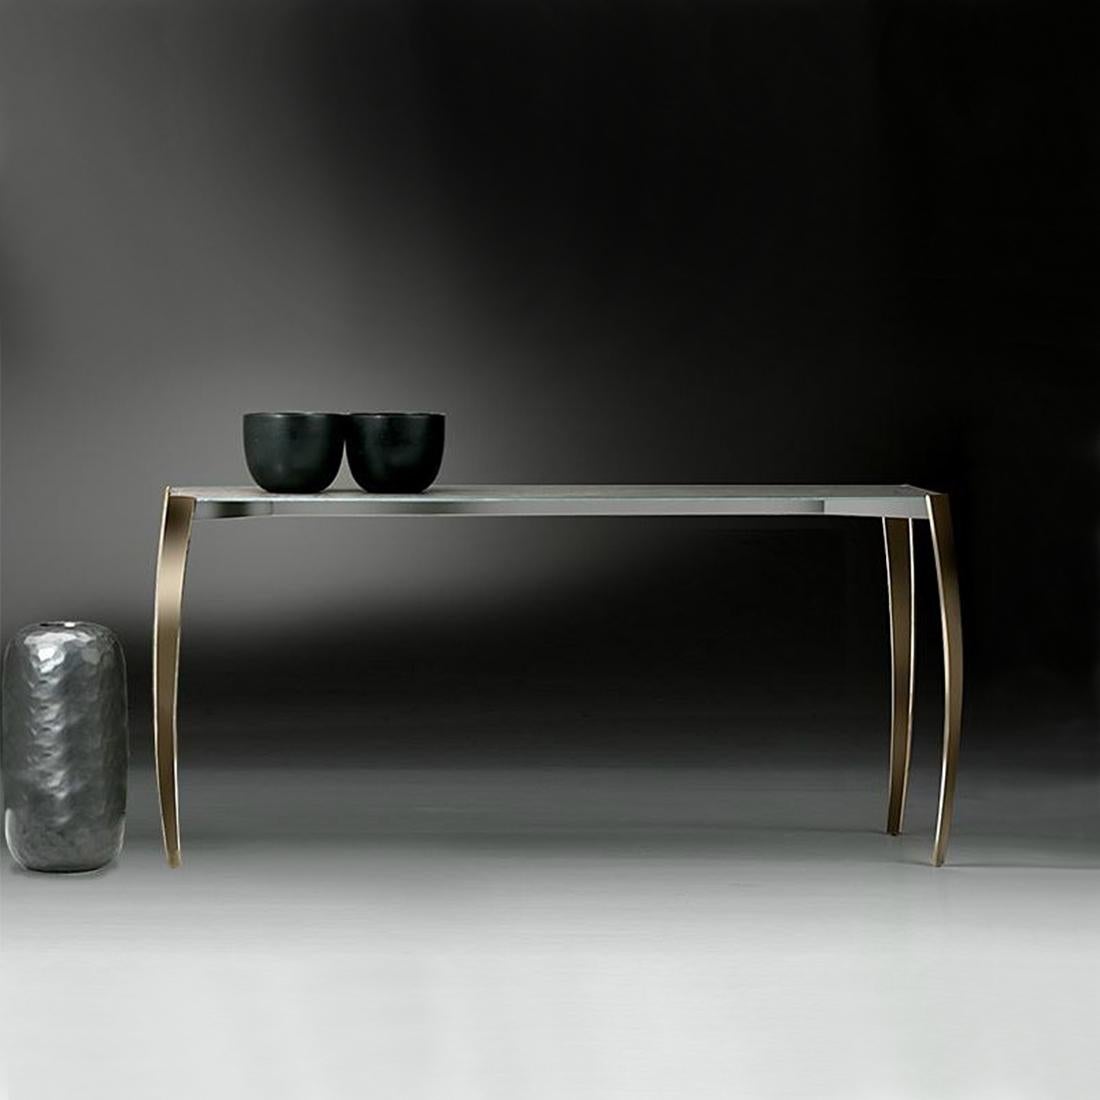 Console table ark ceramic with steel structure
in bronze finish. With ceramic glued on glass top,
8mm thickness.
Also available in coffee table.